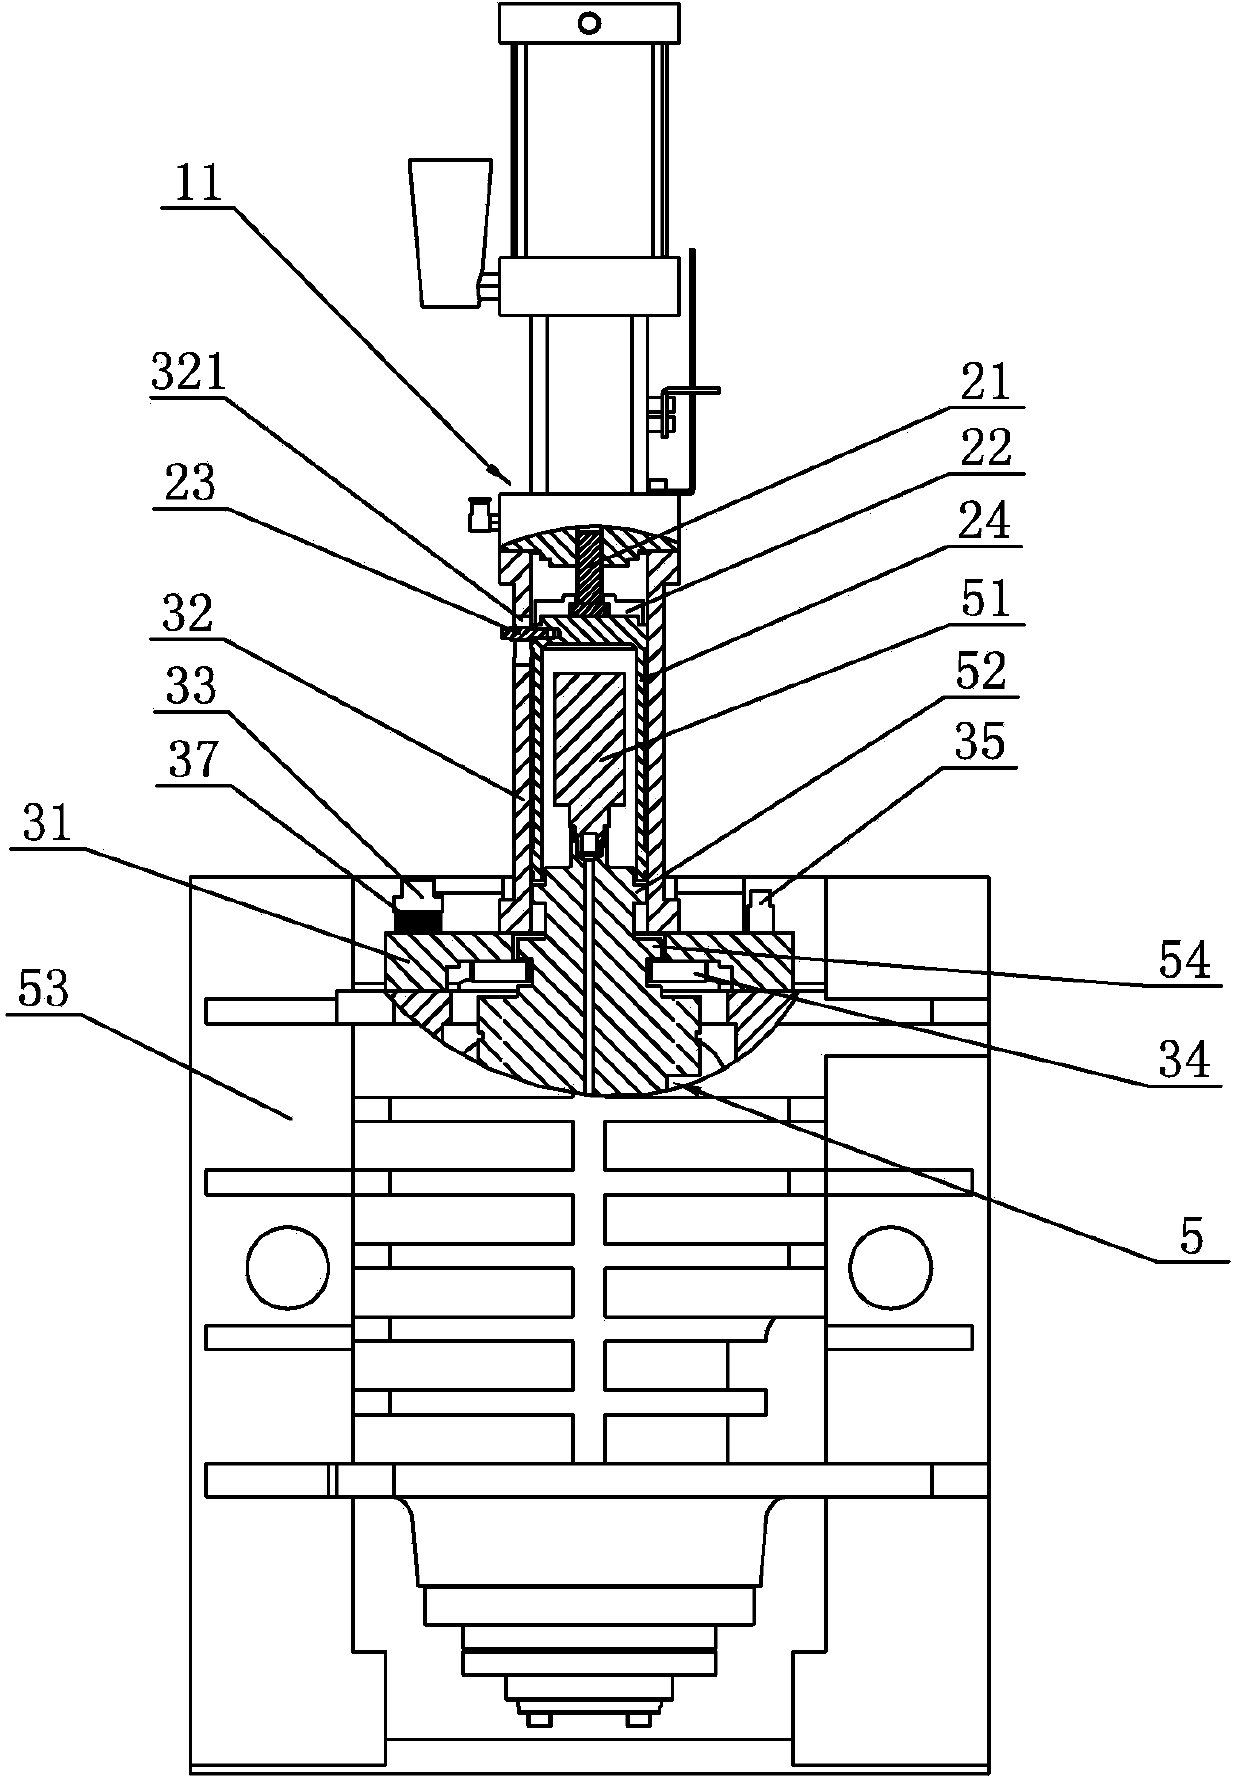 Floating cutter loosening device for central water discharging spindle